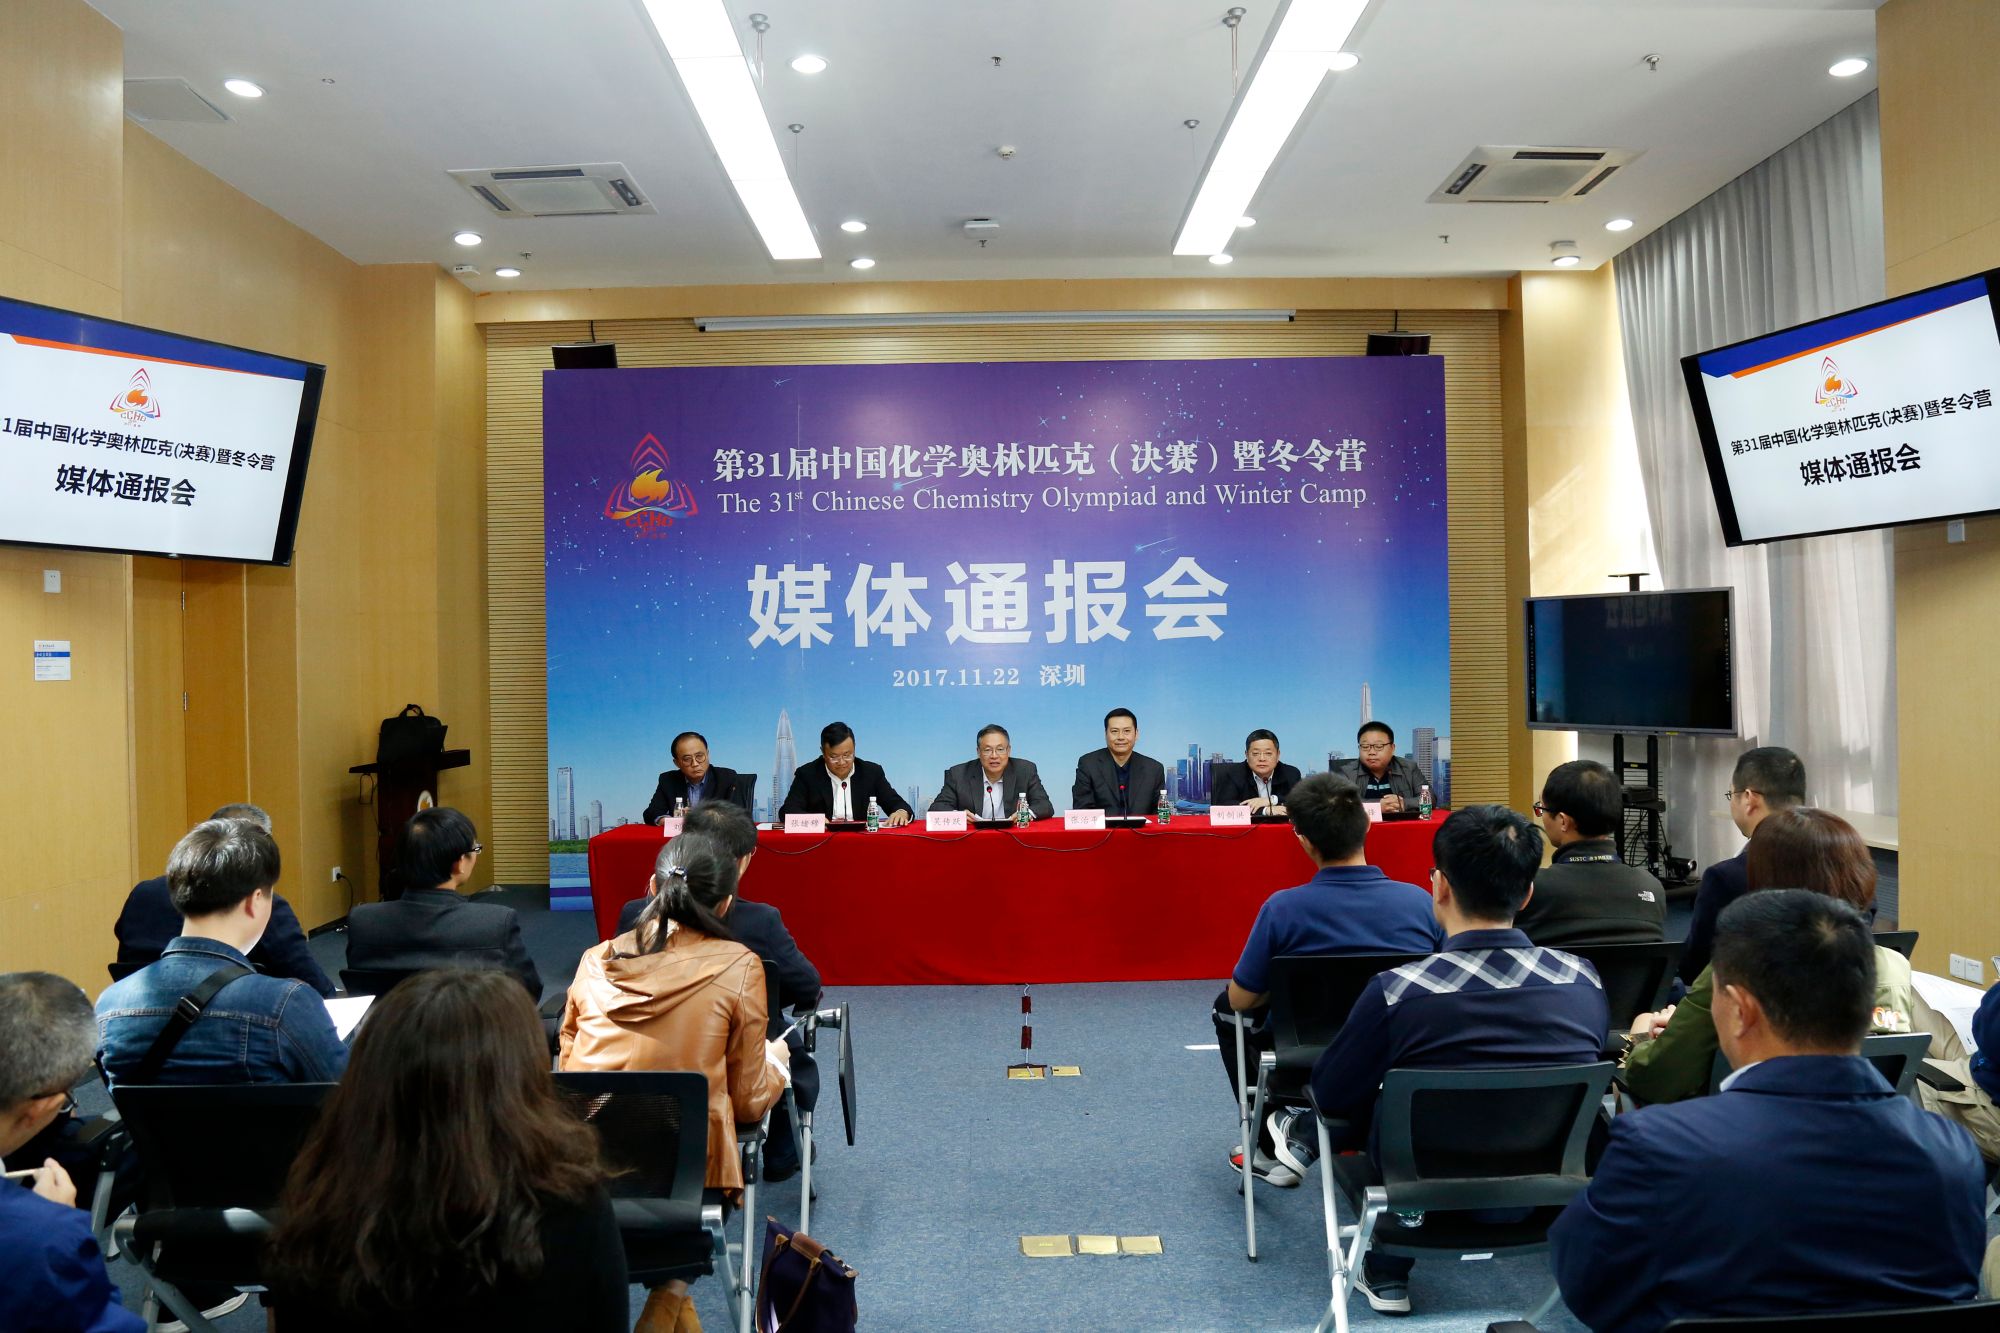 31st Chinese Chemistry Olympiad and Winter Camp press conference held at SUSTech